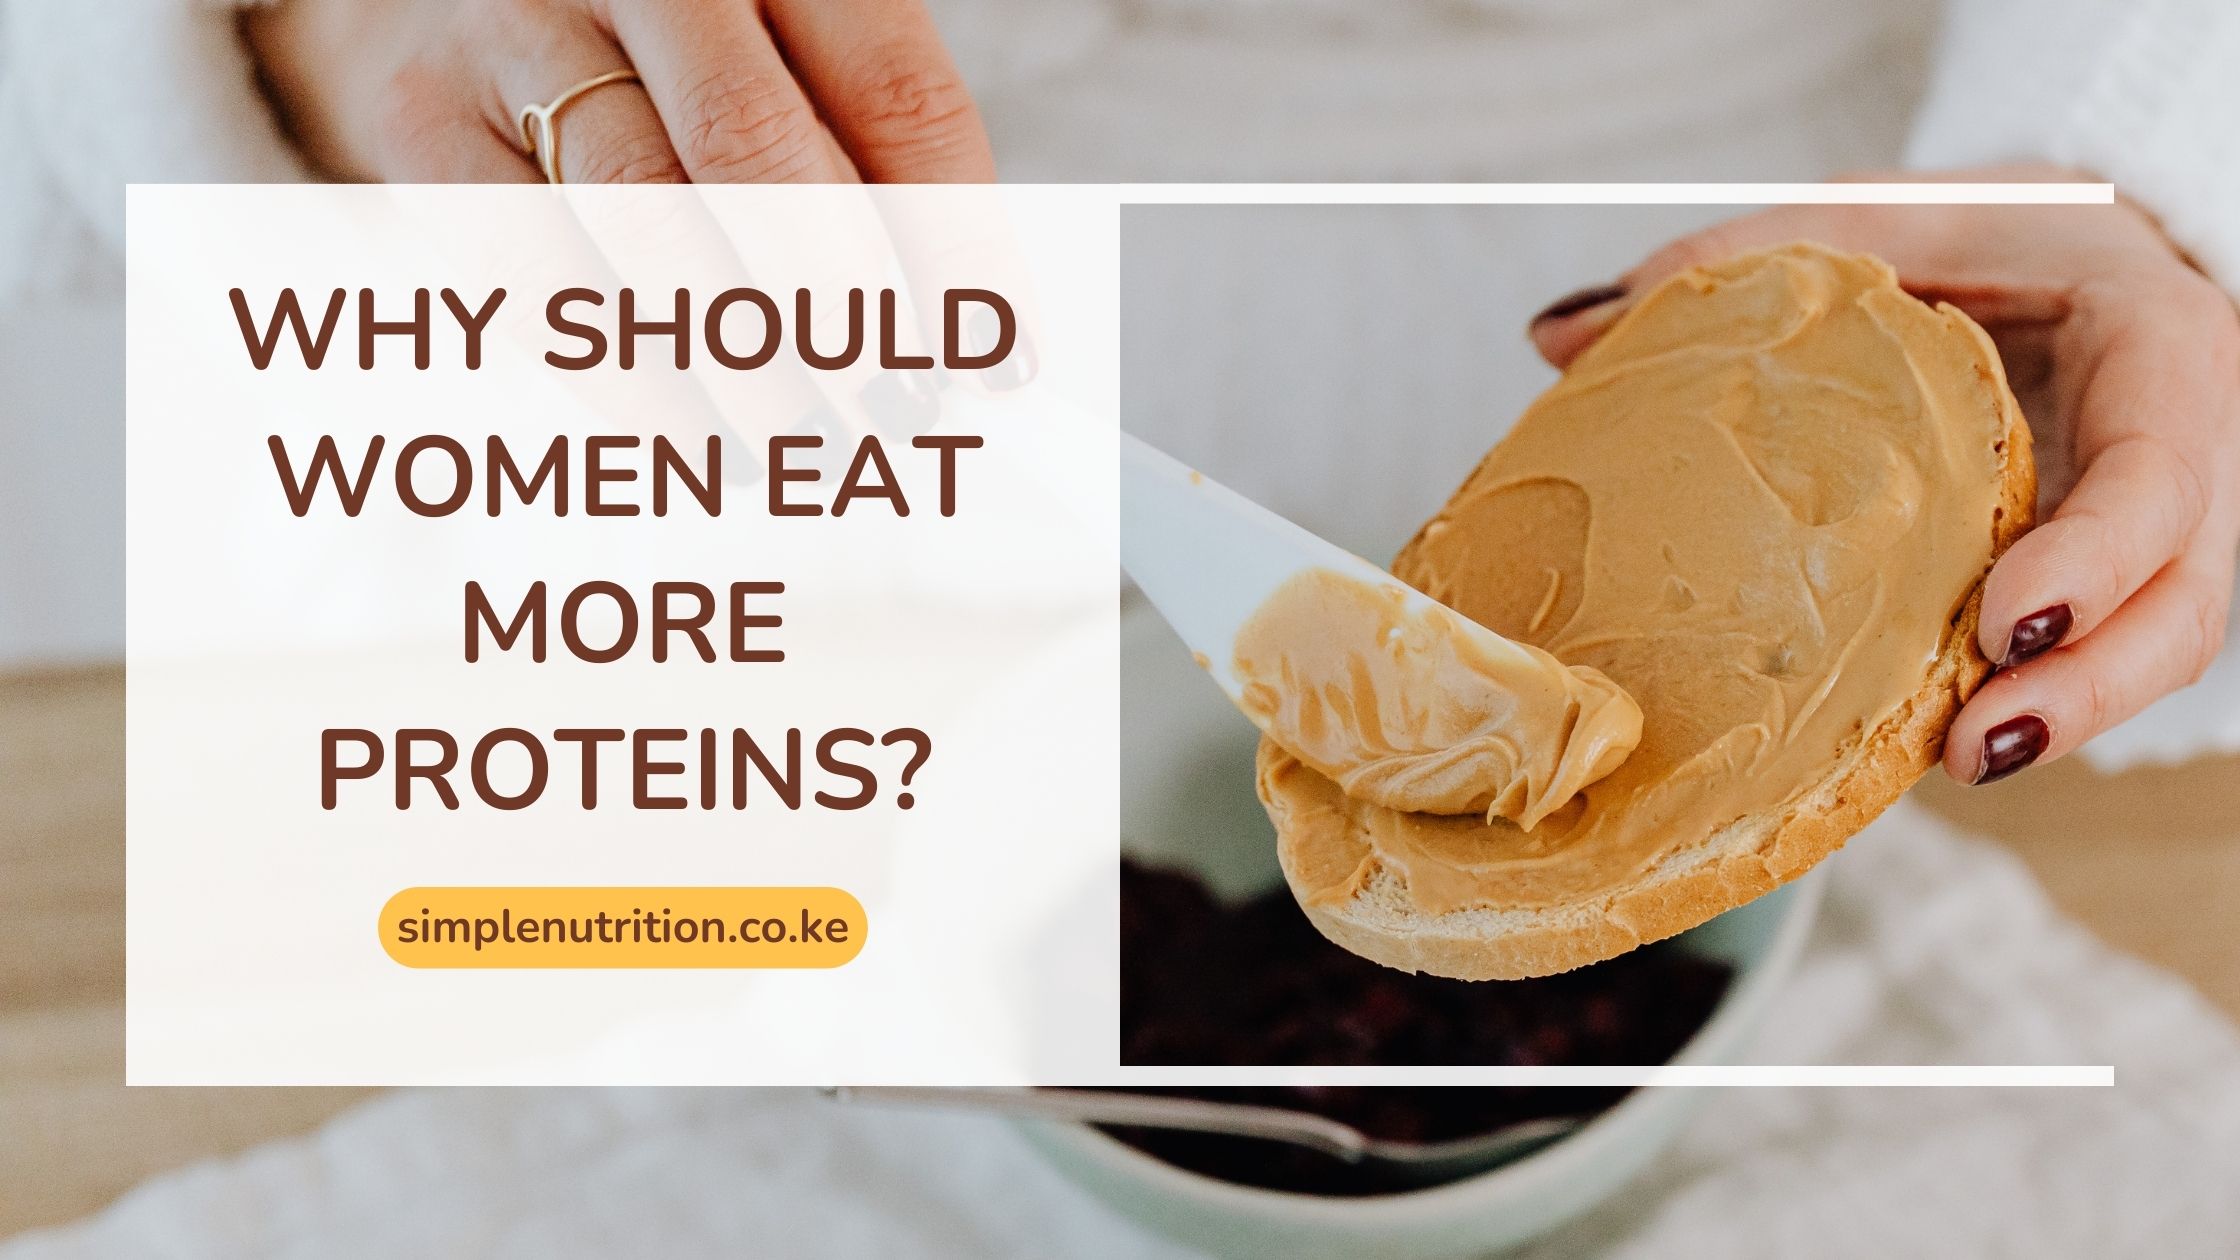 Why Should Women Eat More Proteins?